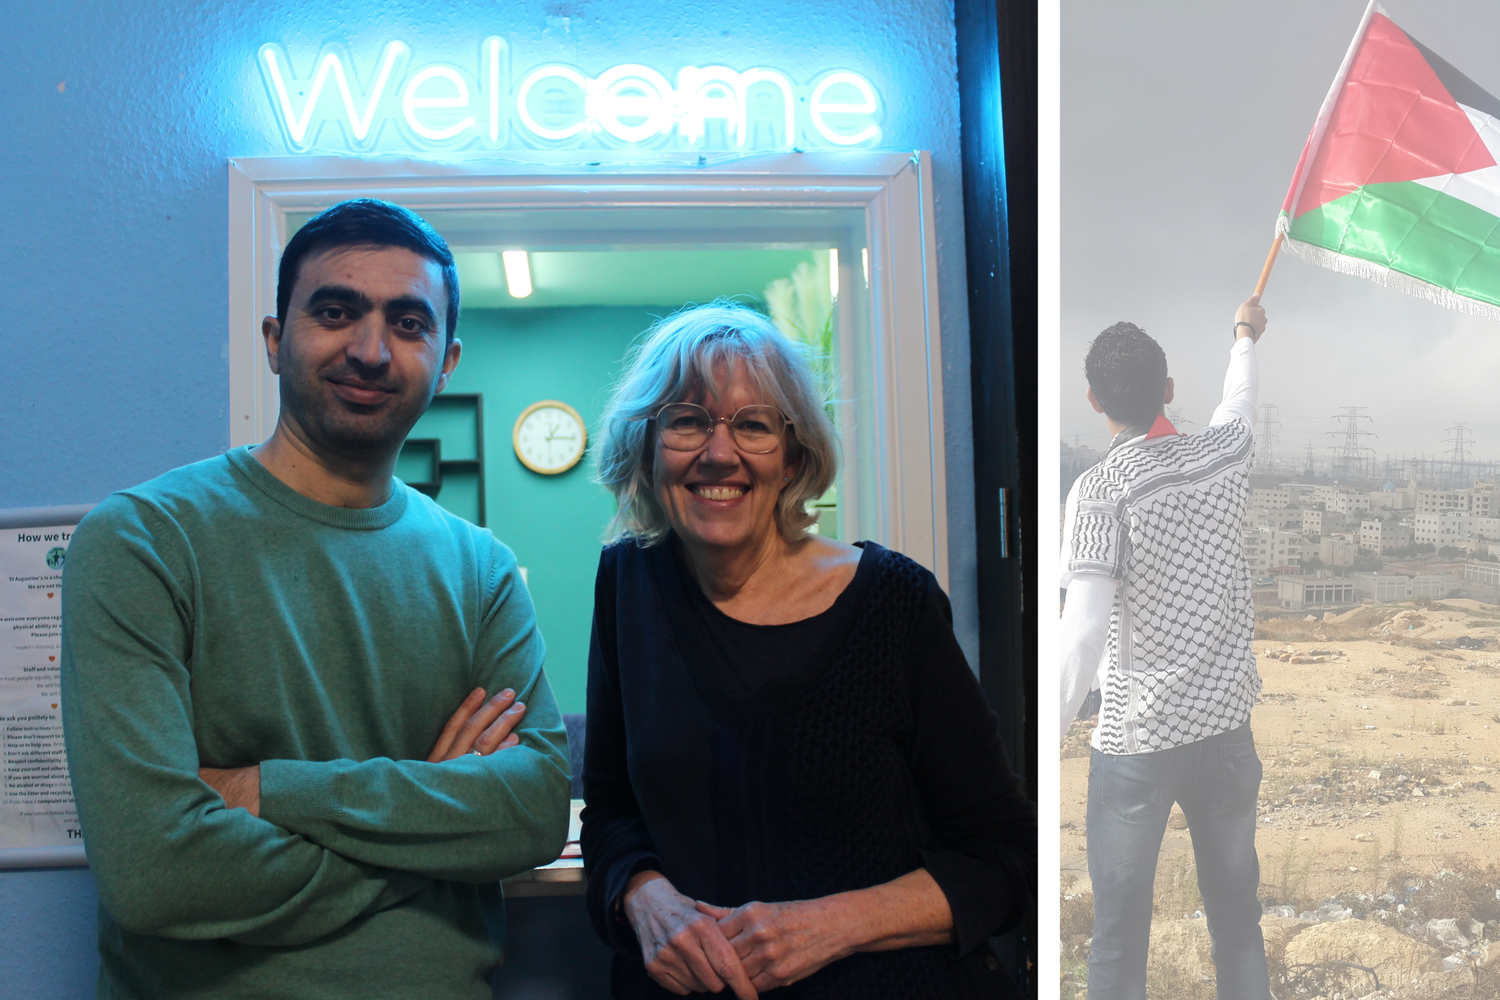 image of a woman and a man with "welcome" above their head, alongside an image of a person waving a Palestine flag